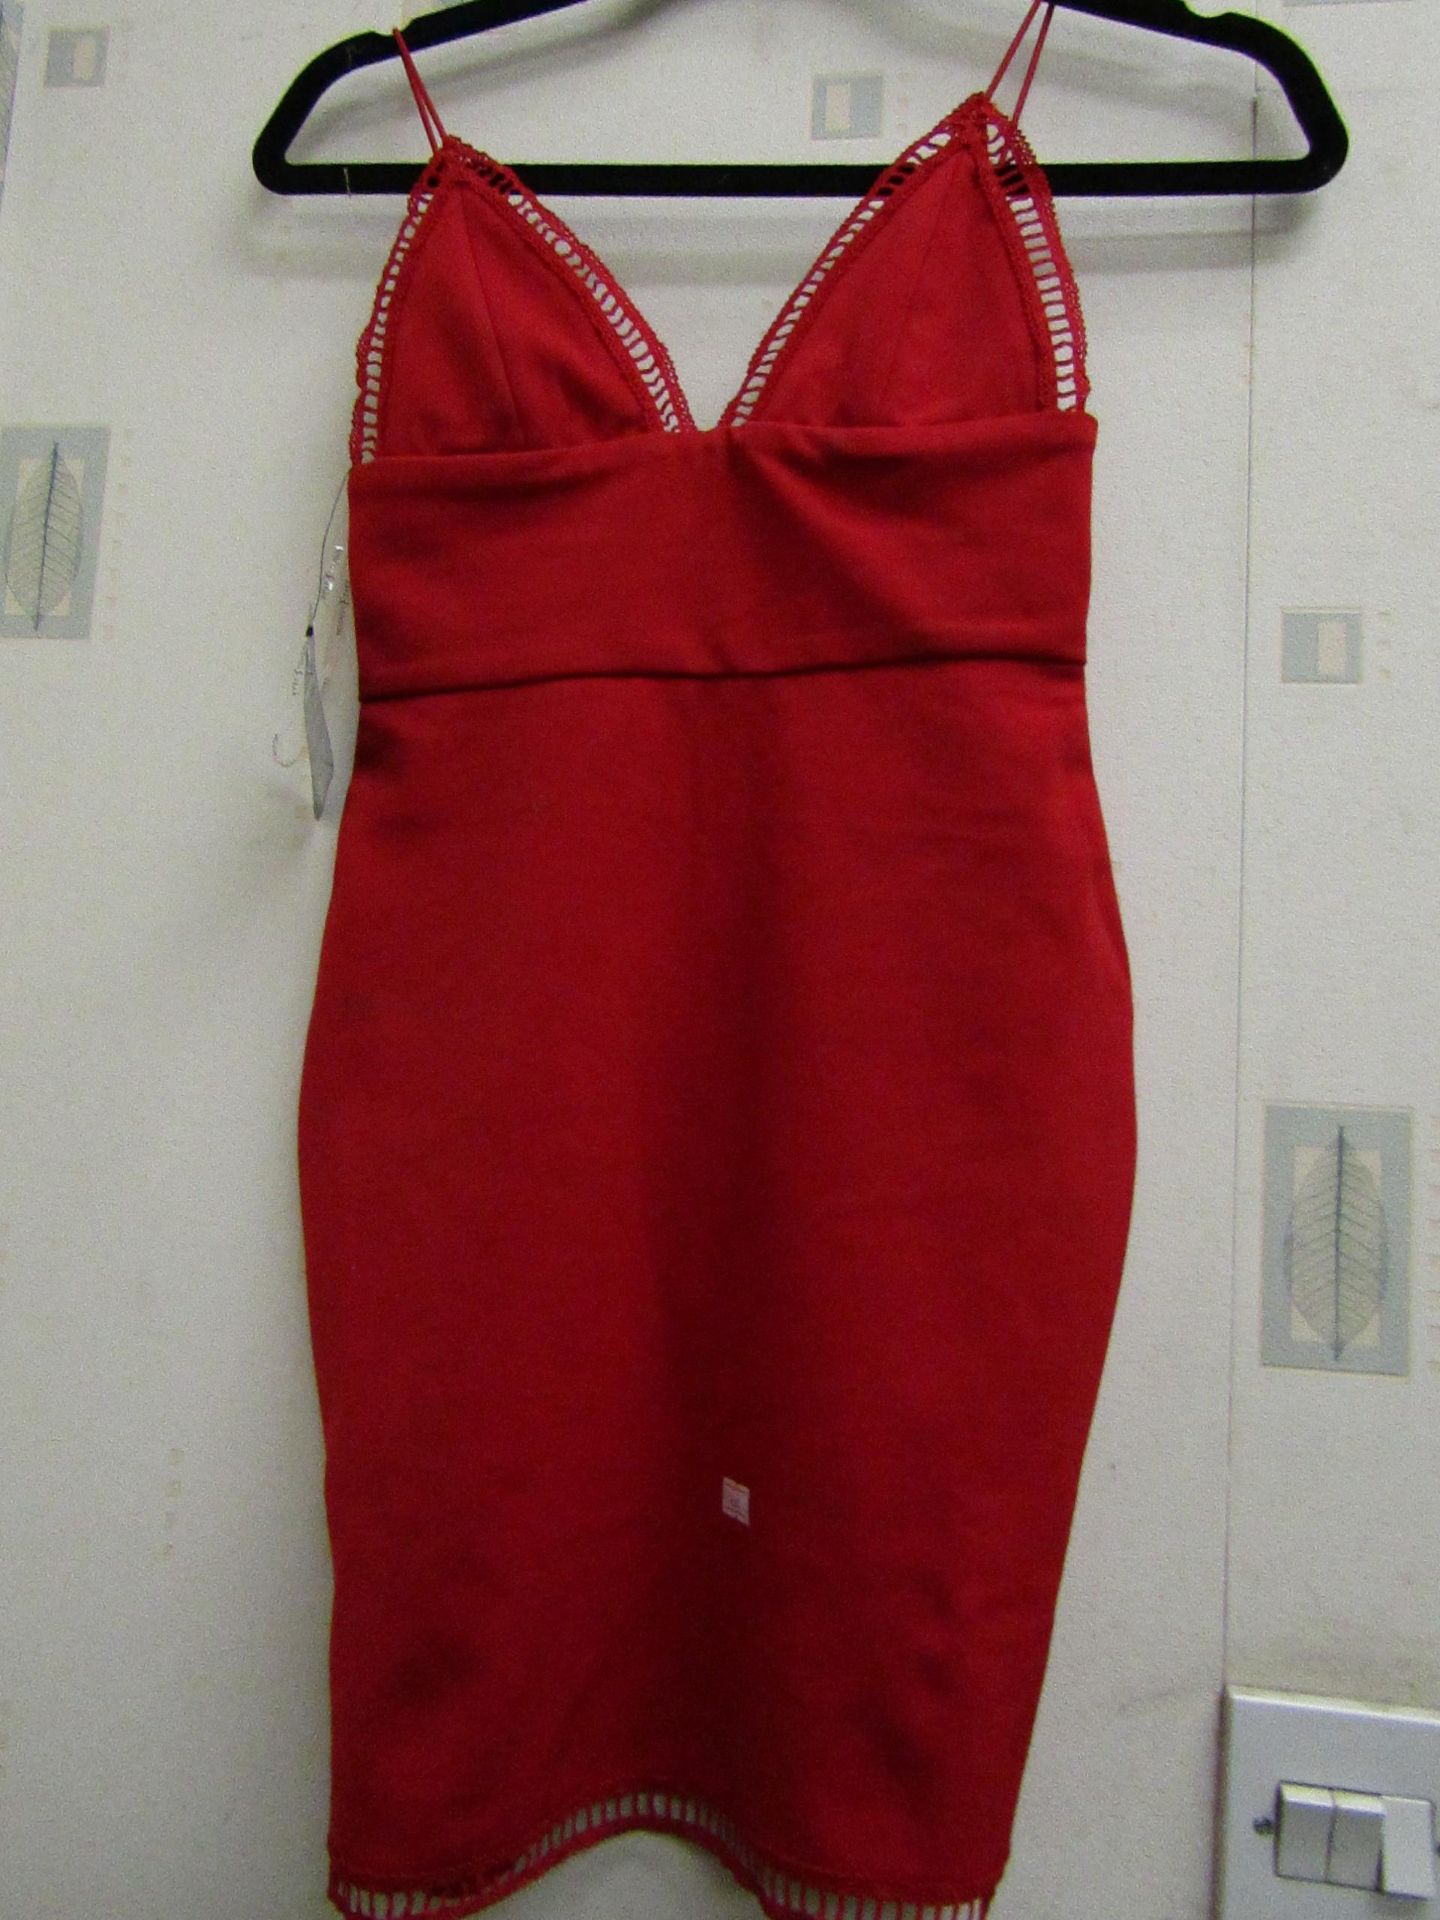 2 X Rare London Red Dresses Size 8 Both new with Tags